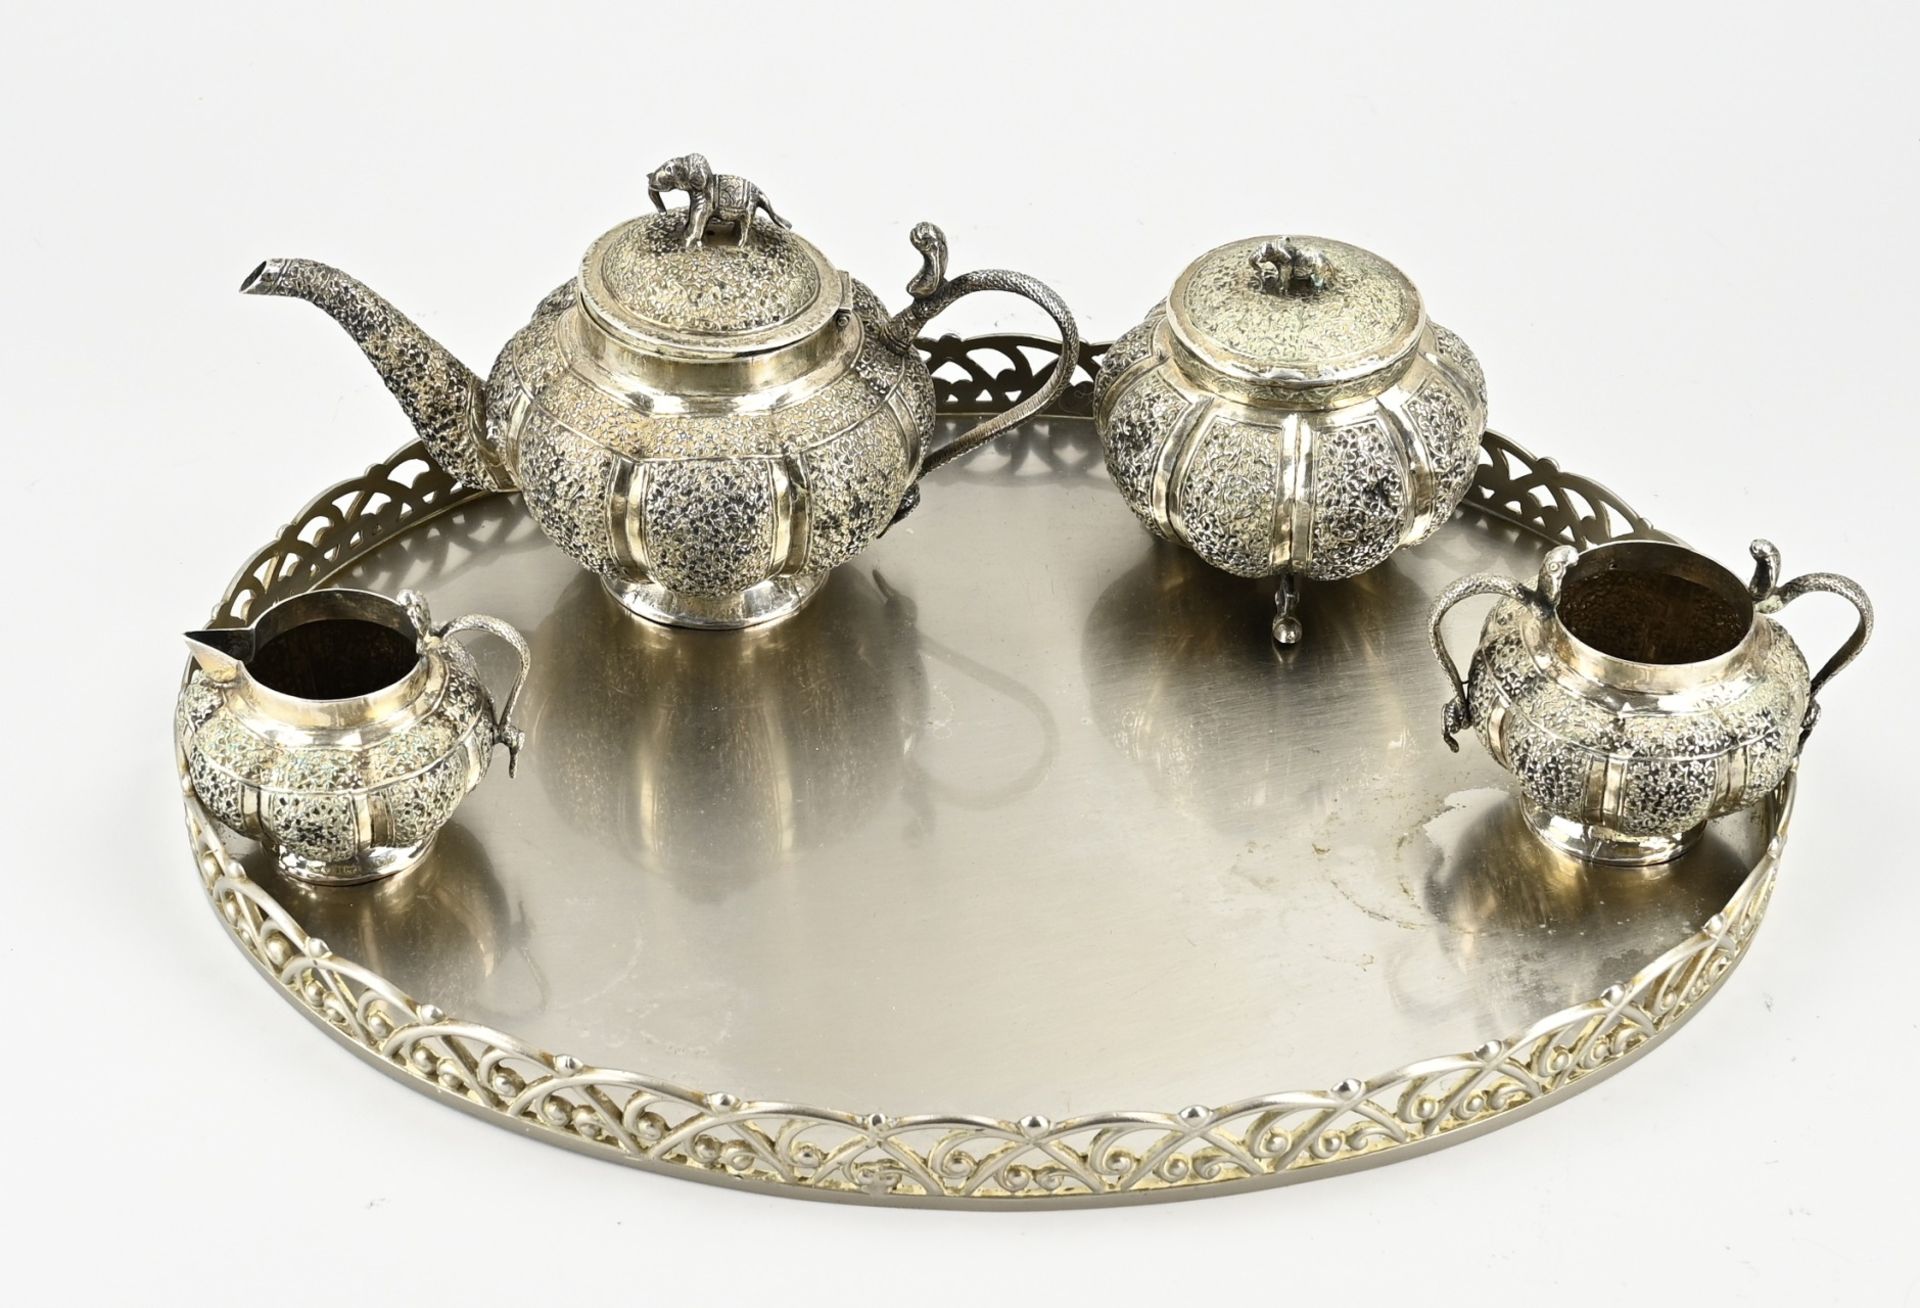 Tea set with tablet - Image 2 of 2